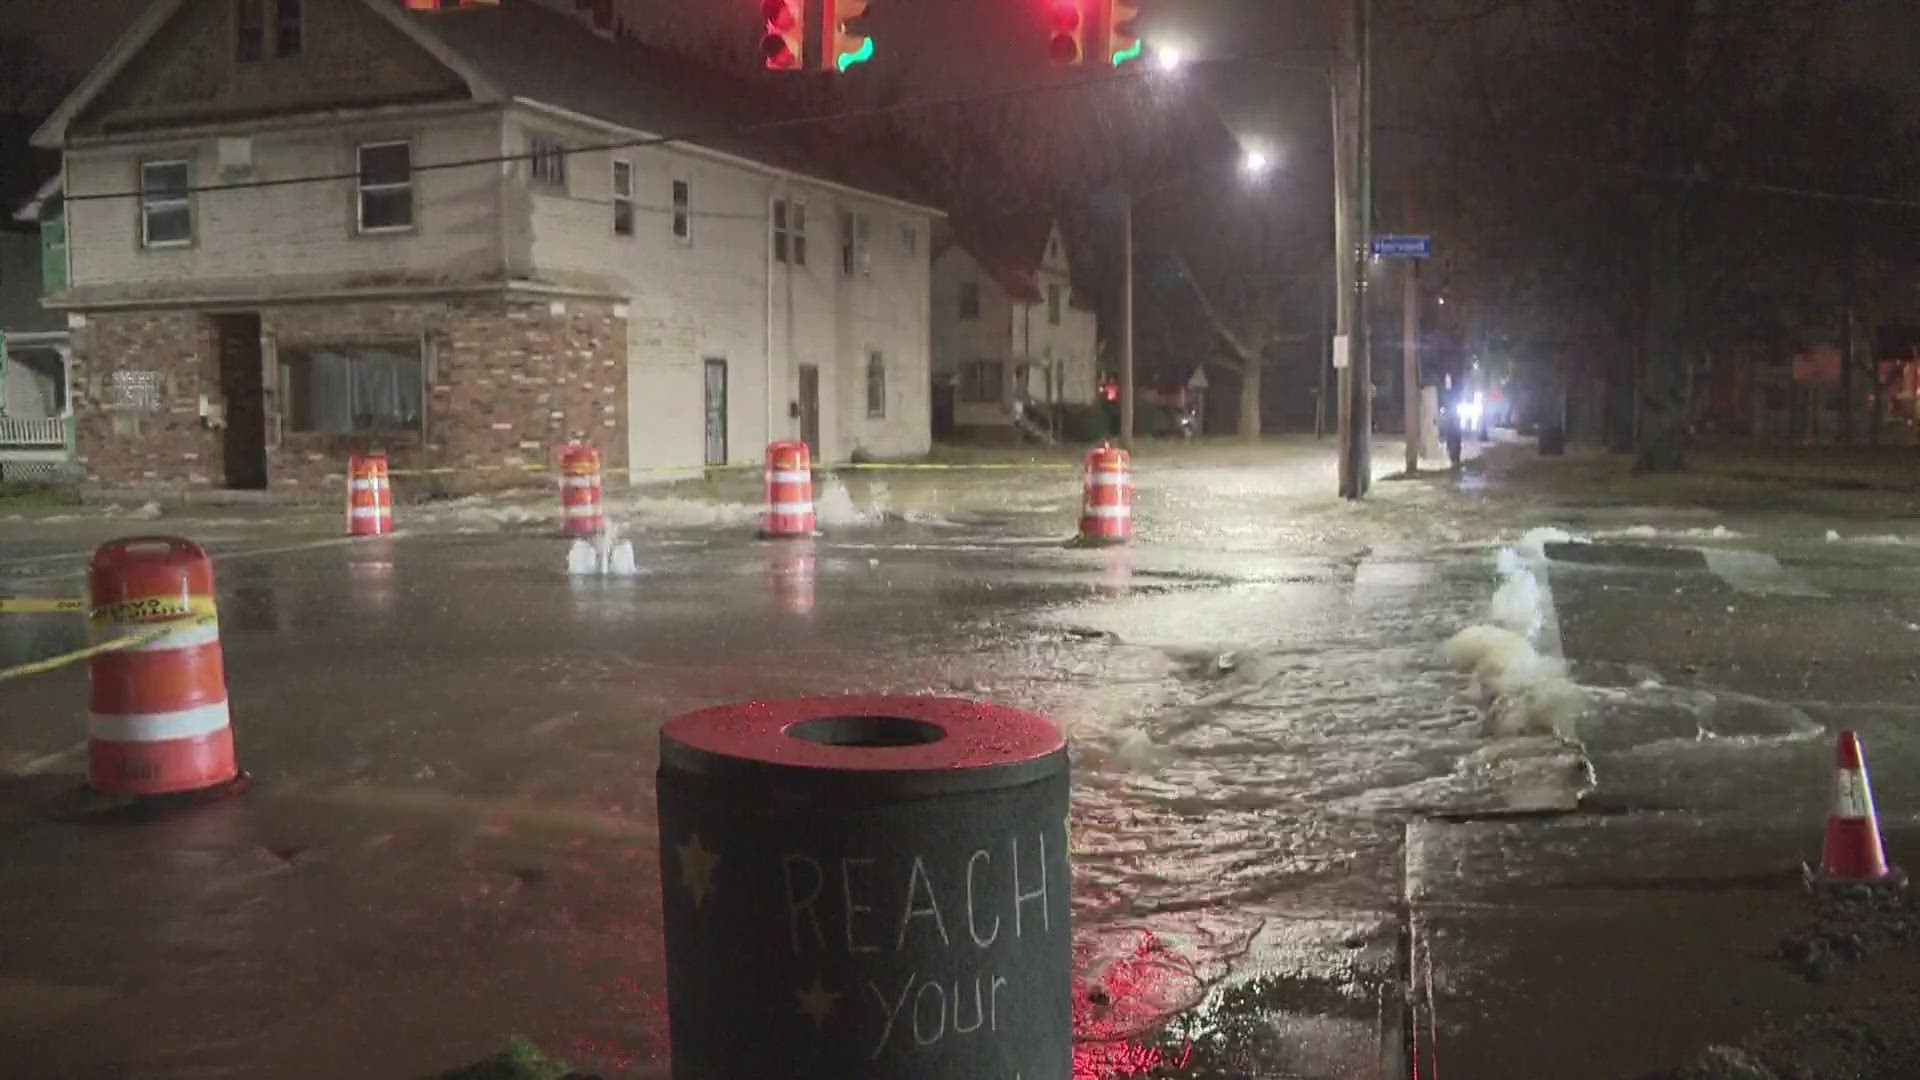 The roadway has turned into a river due to a water main break in Cleveland.